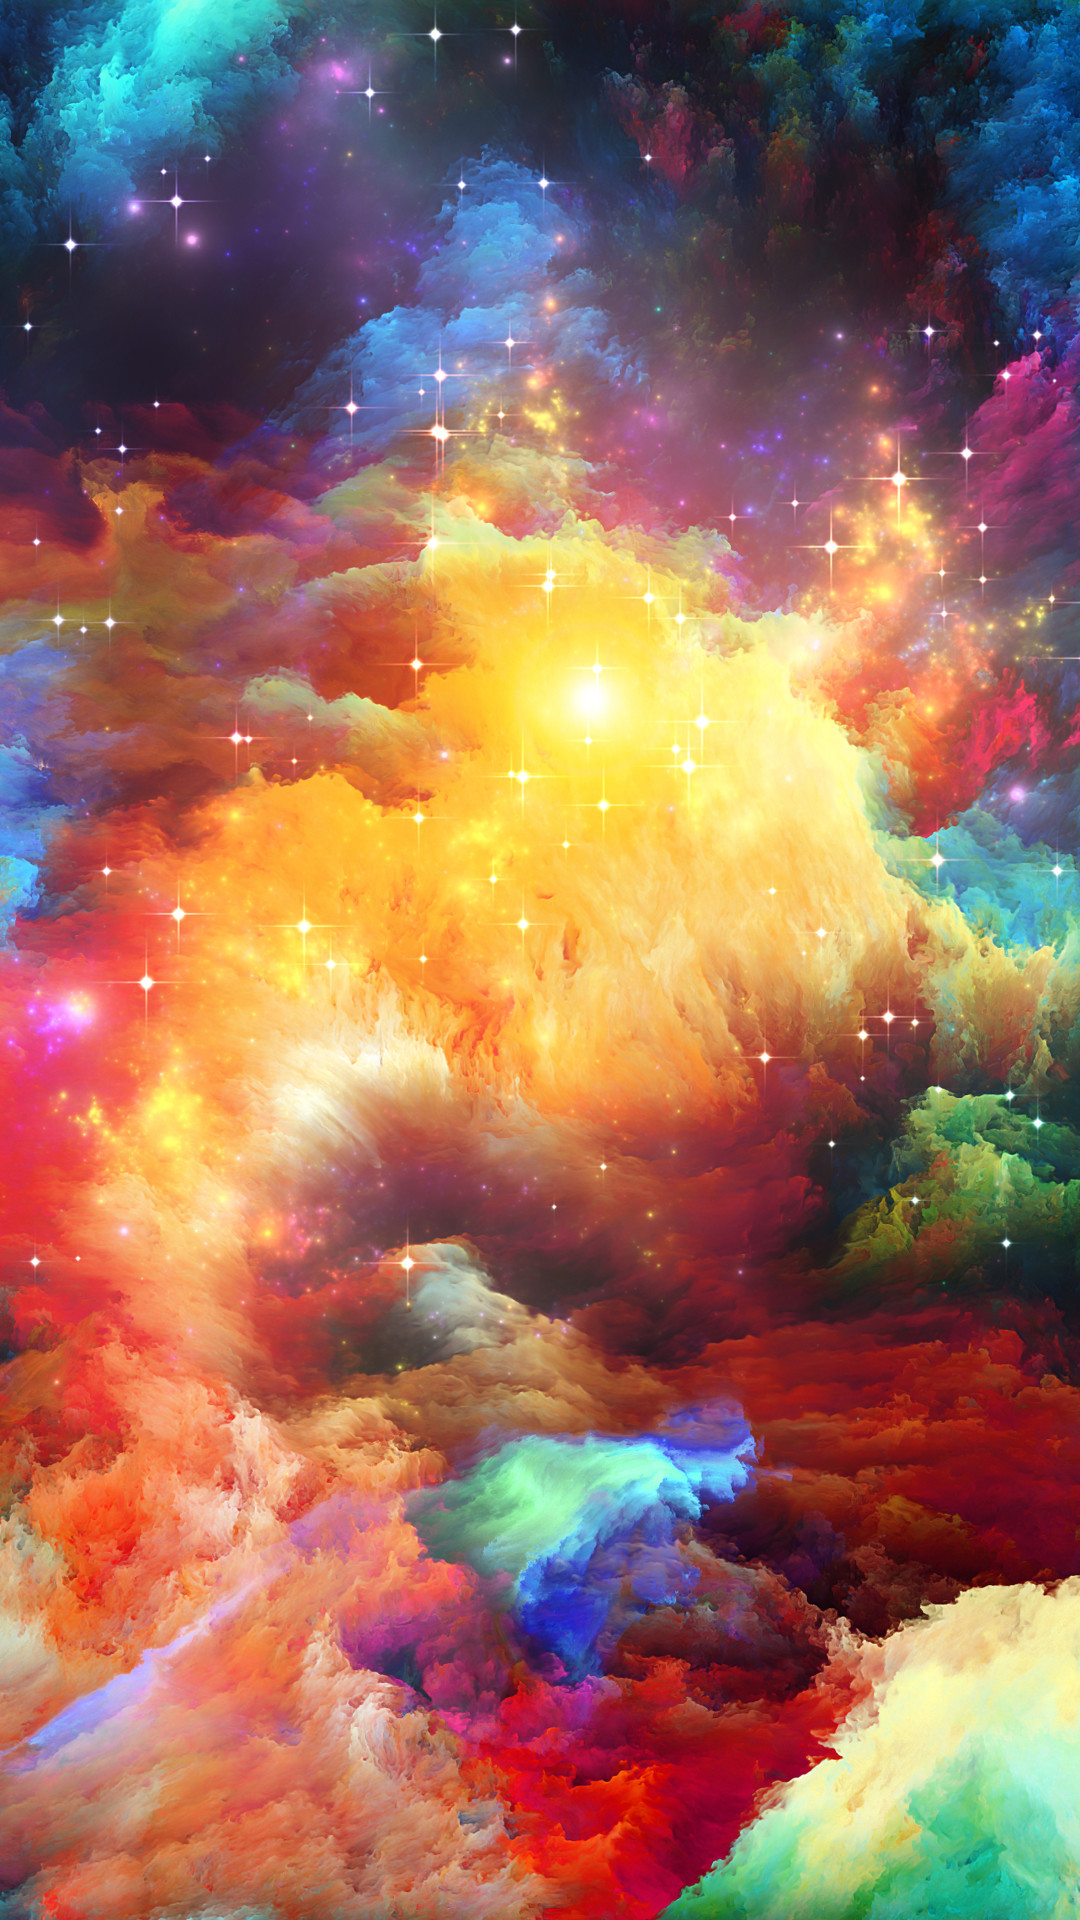 colorful background wallpaper,nebula,sky,watercolor paint,astronomical object,atmosphere